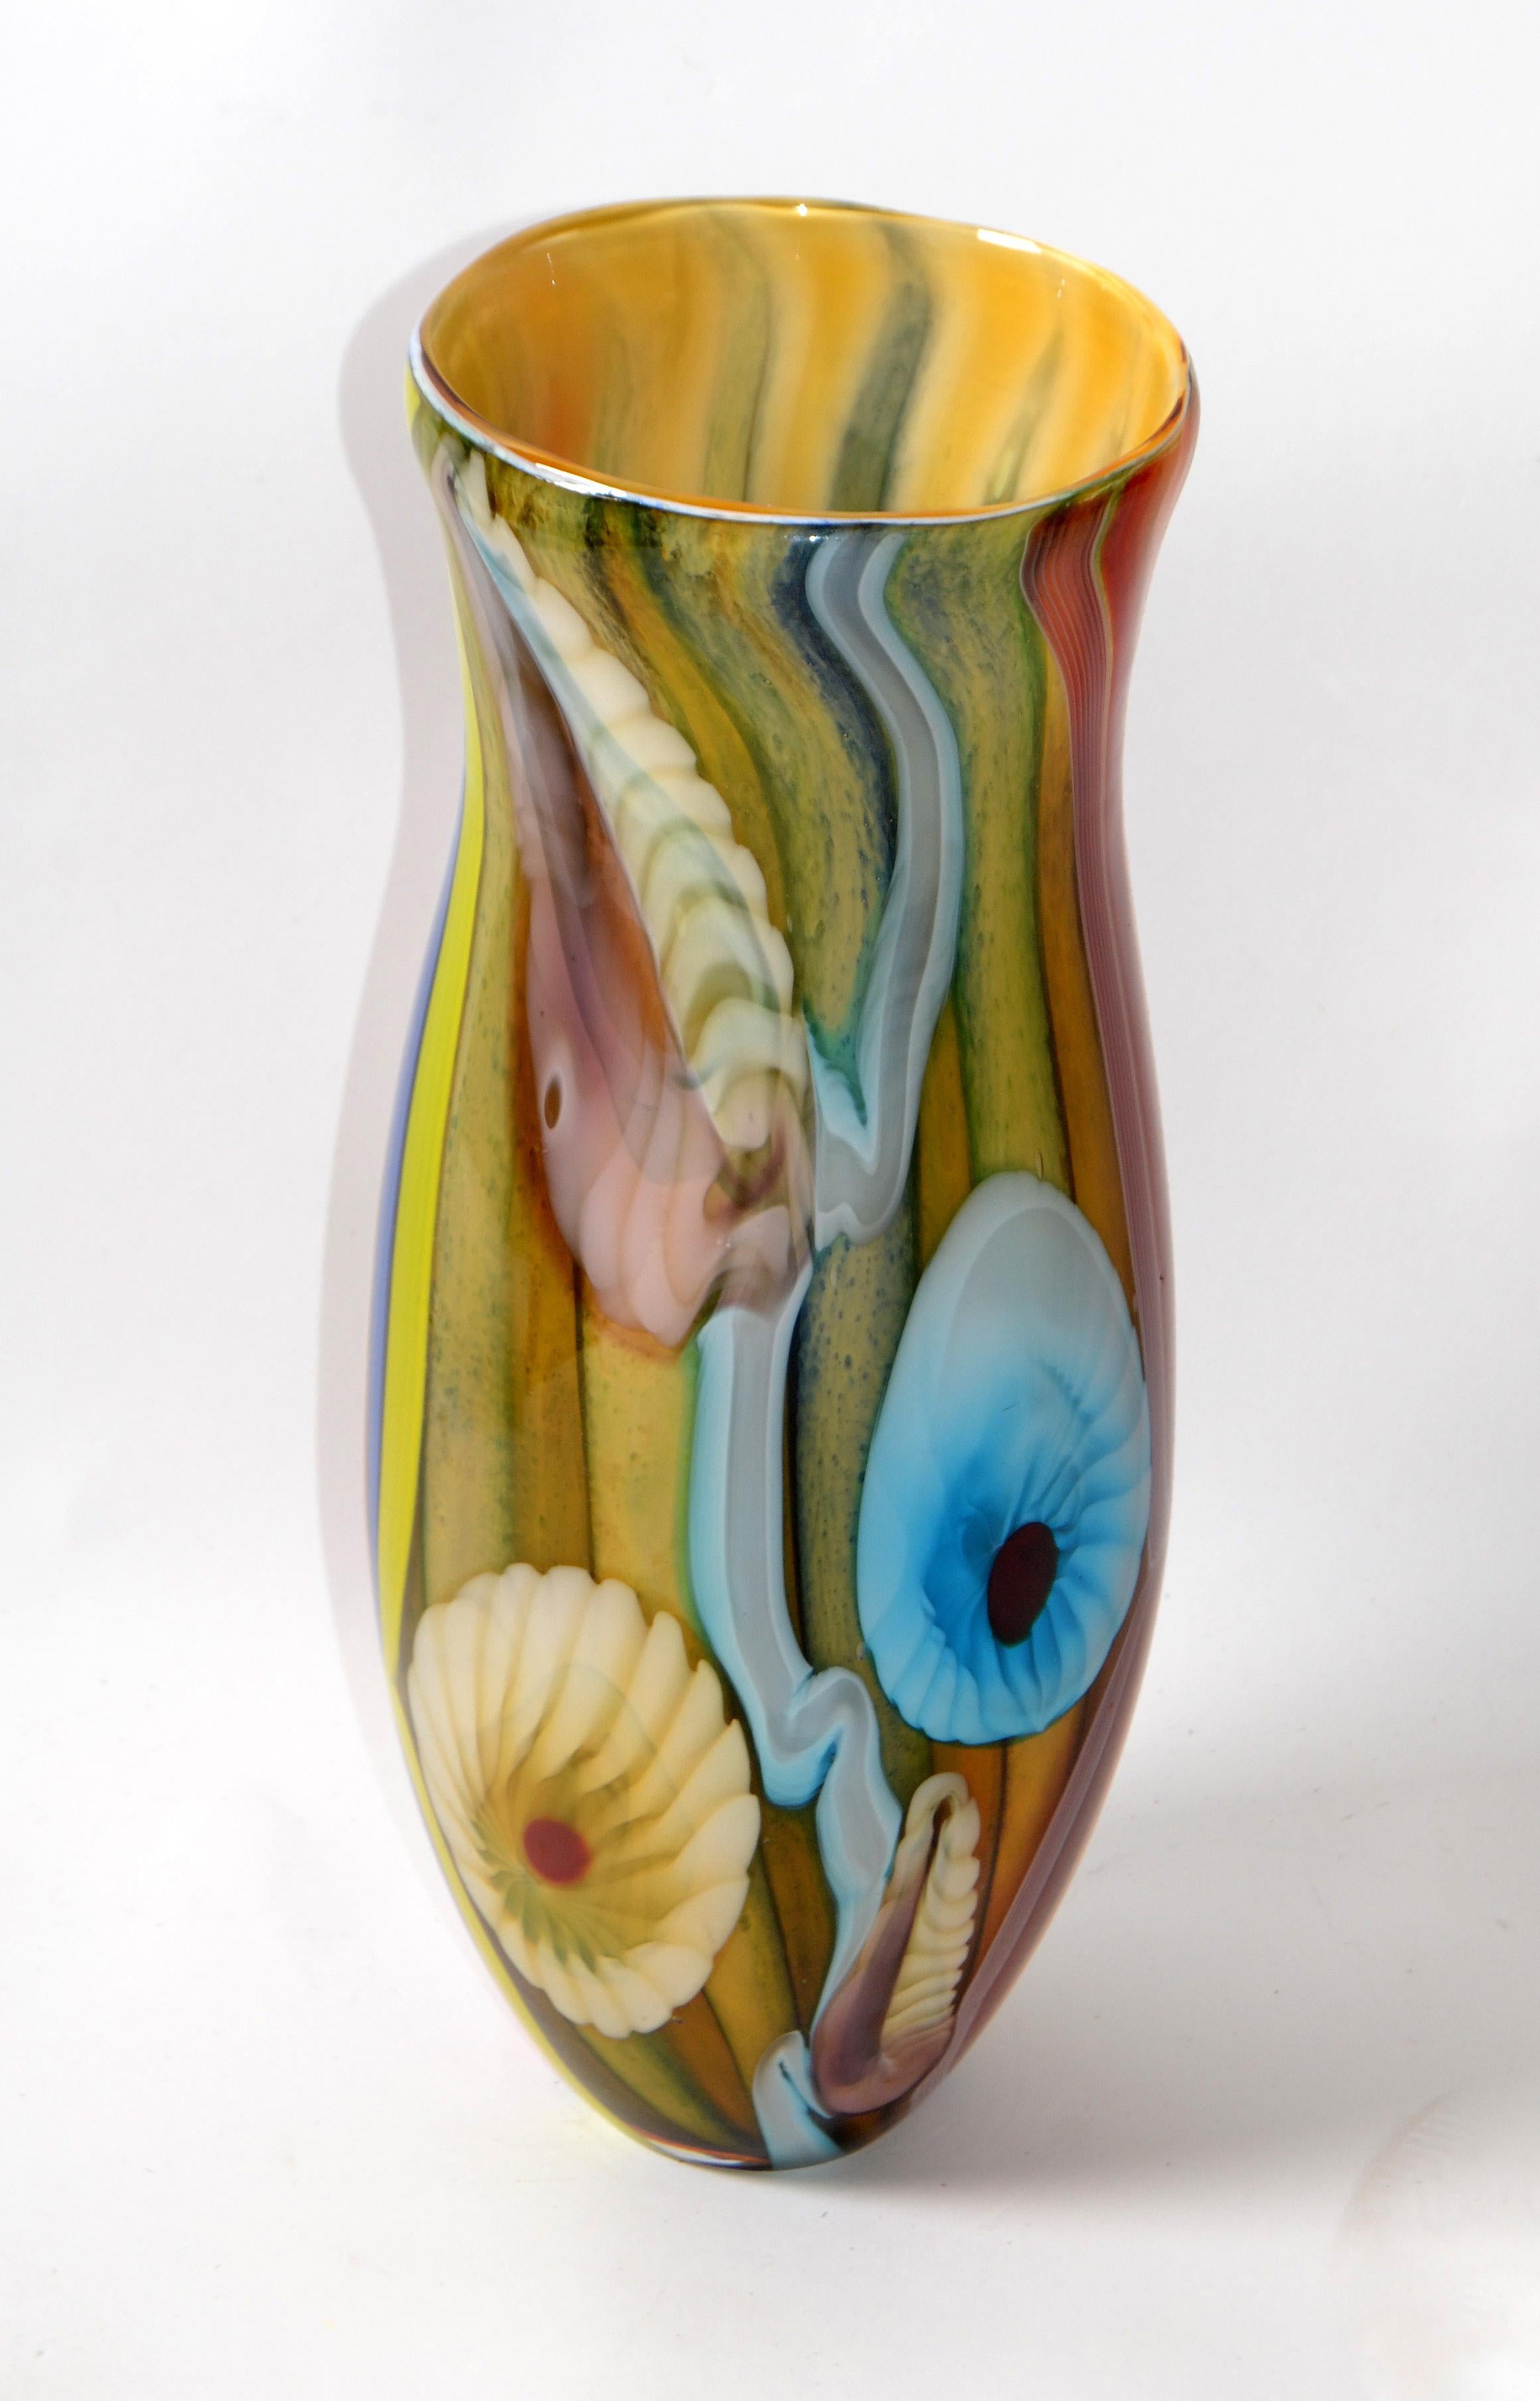 Heavy beautiful art glass Vase in hues of green, blue and bronze dust with Nautical Motif.
Comes from the Eastern European Polish Nation.
Beautifully crafted and flowing color brilliance.